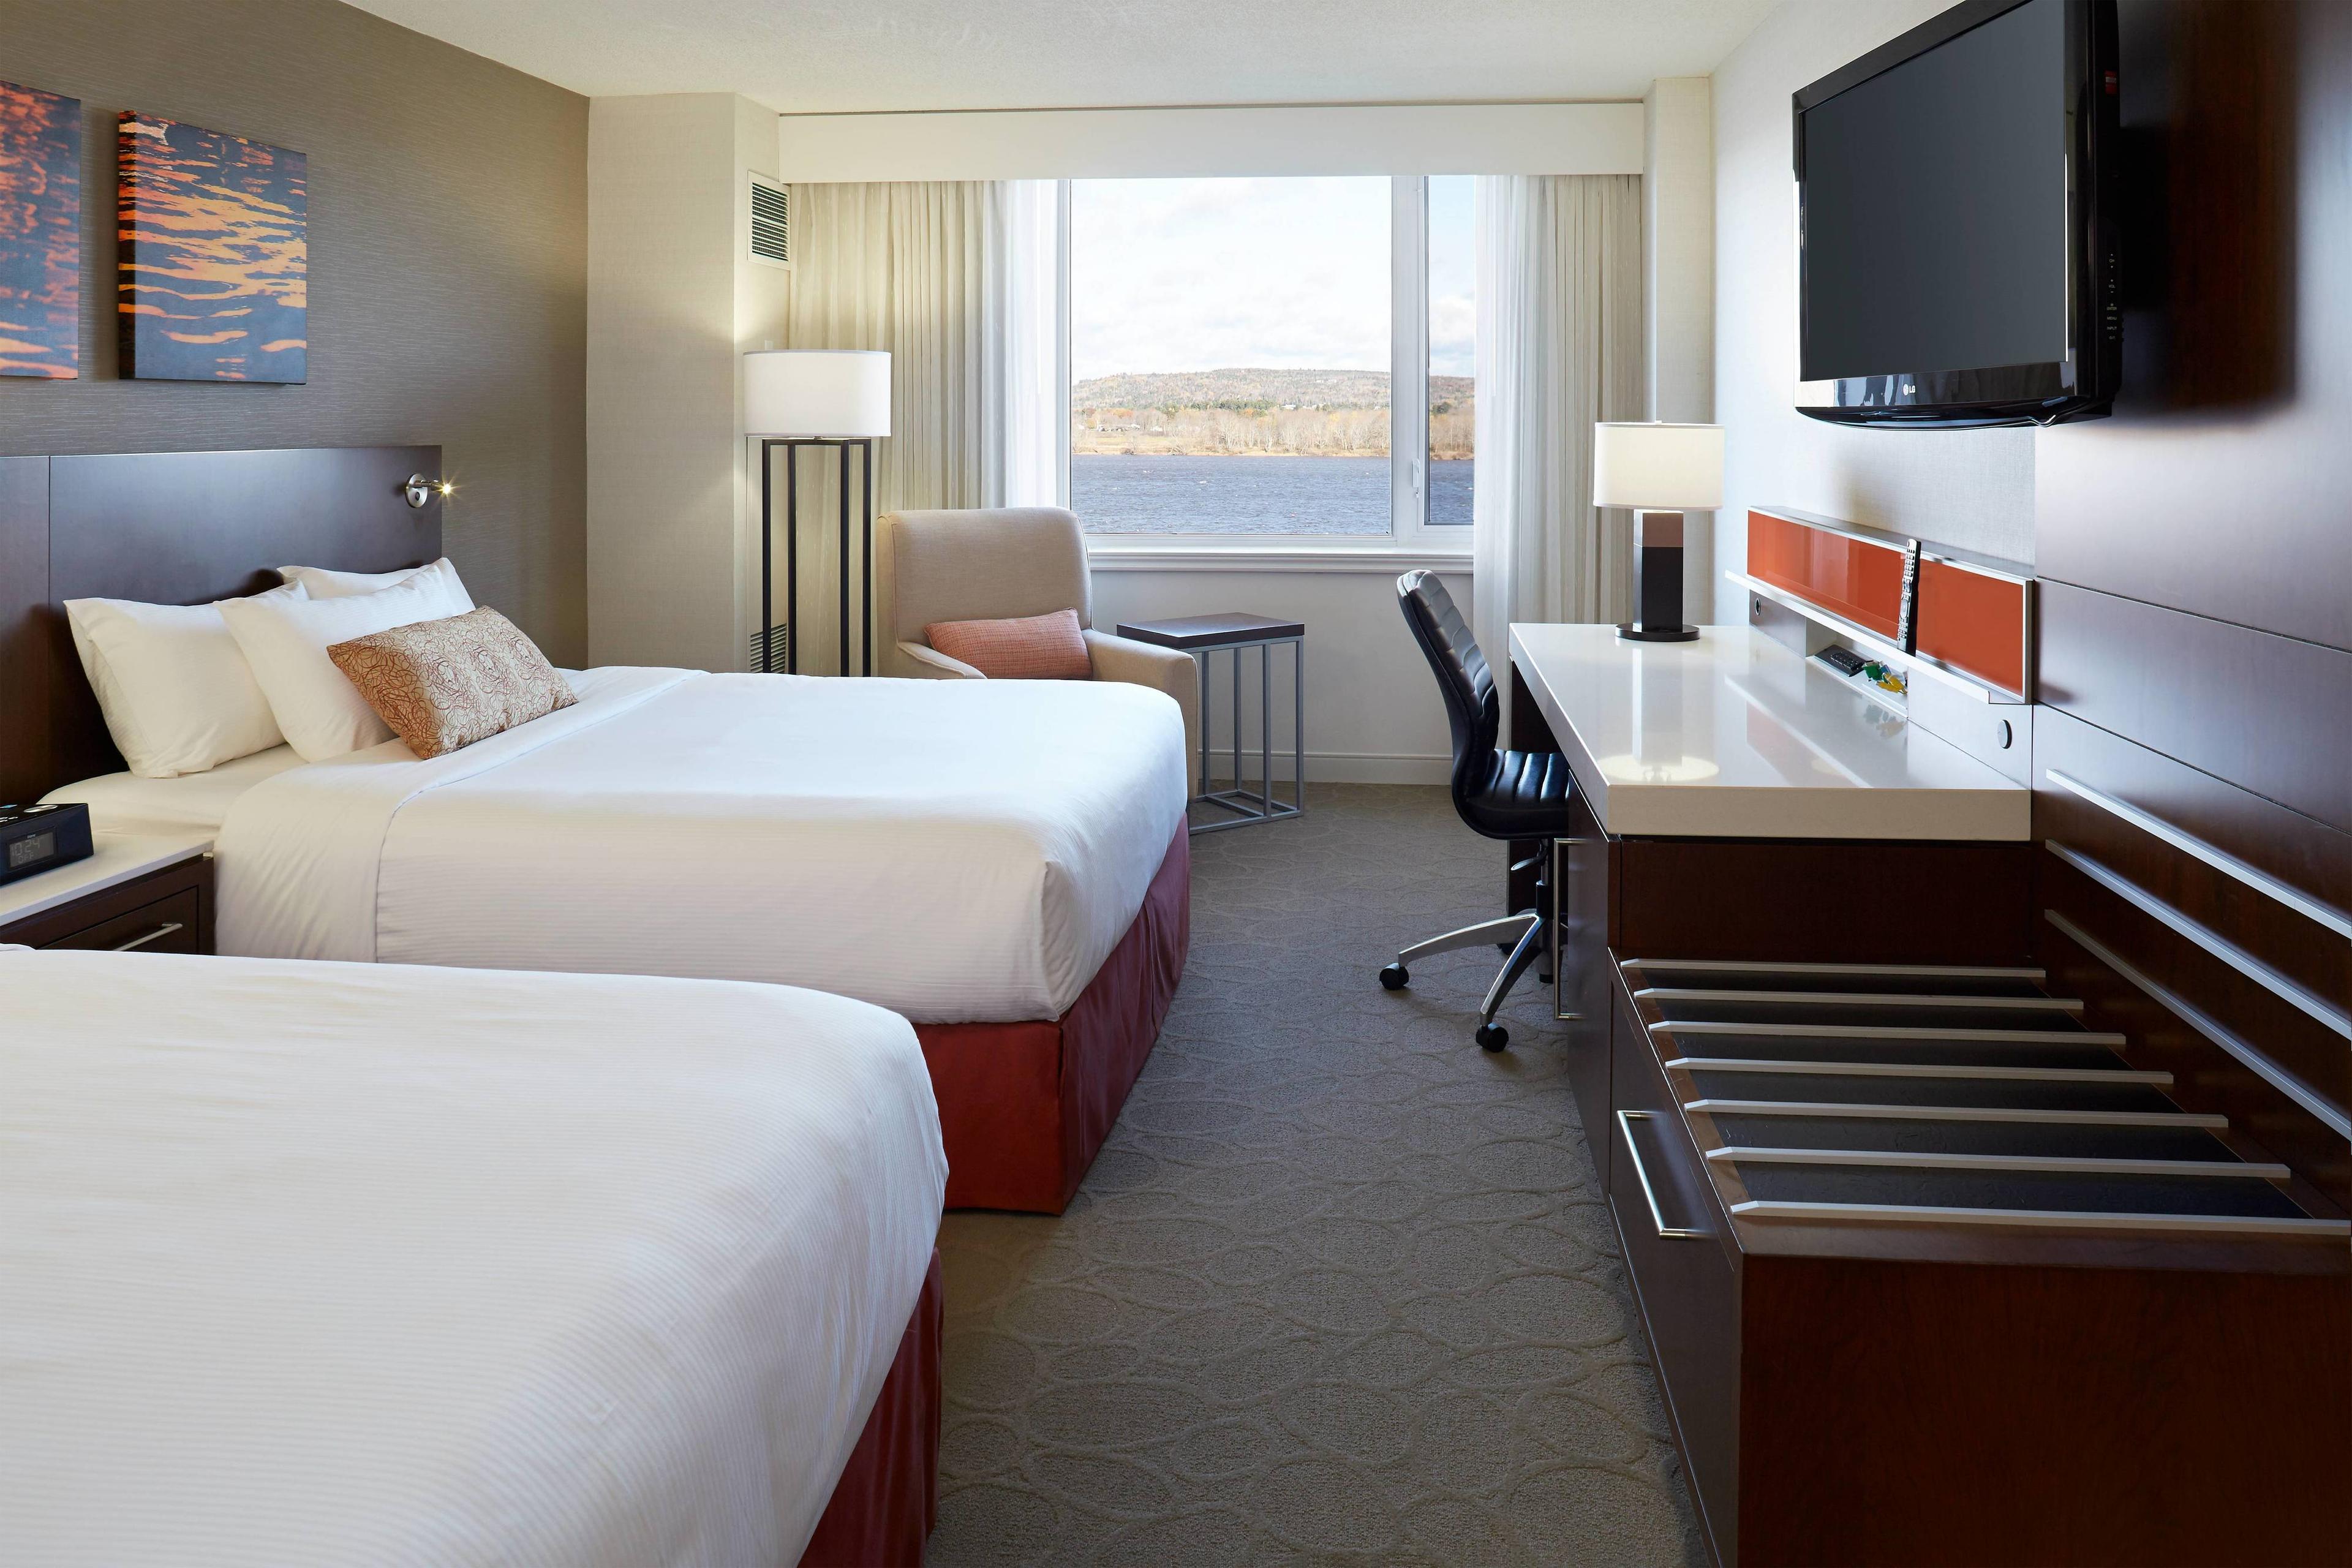 Our spacious and comfortable guest rooms feature sanctuary bedding, a flat-panel TV, a SmartDesk™ with multiple connectivity docks, complimentary wireless and wired high speed internet access, and spectacular views of the Saint John River.